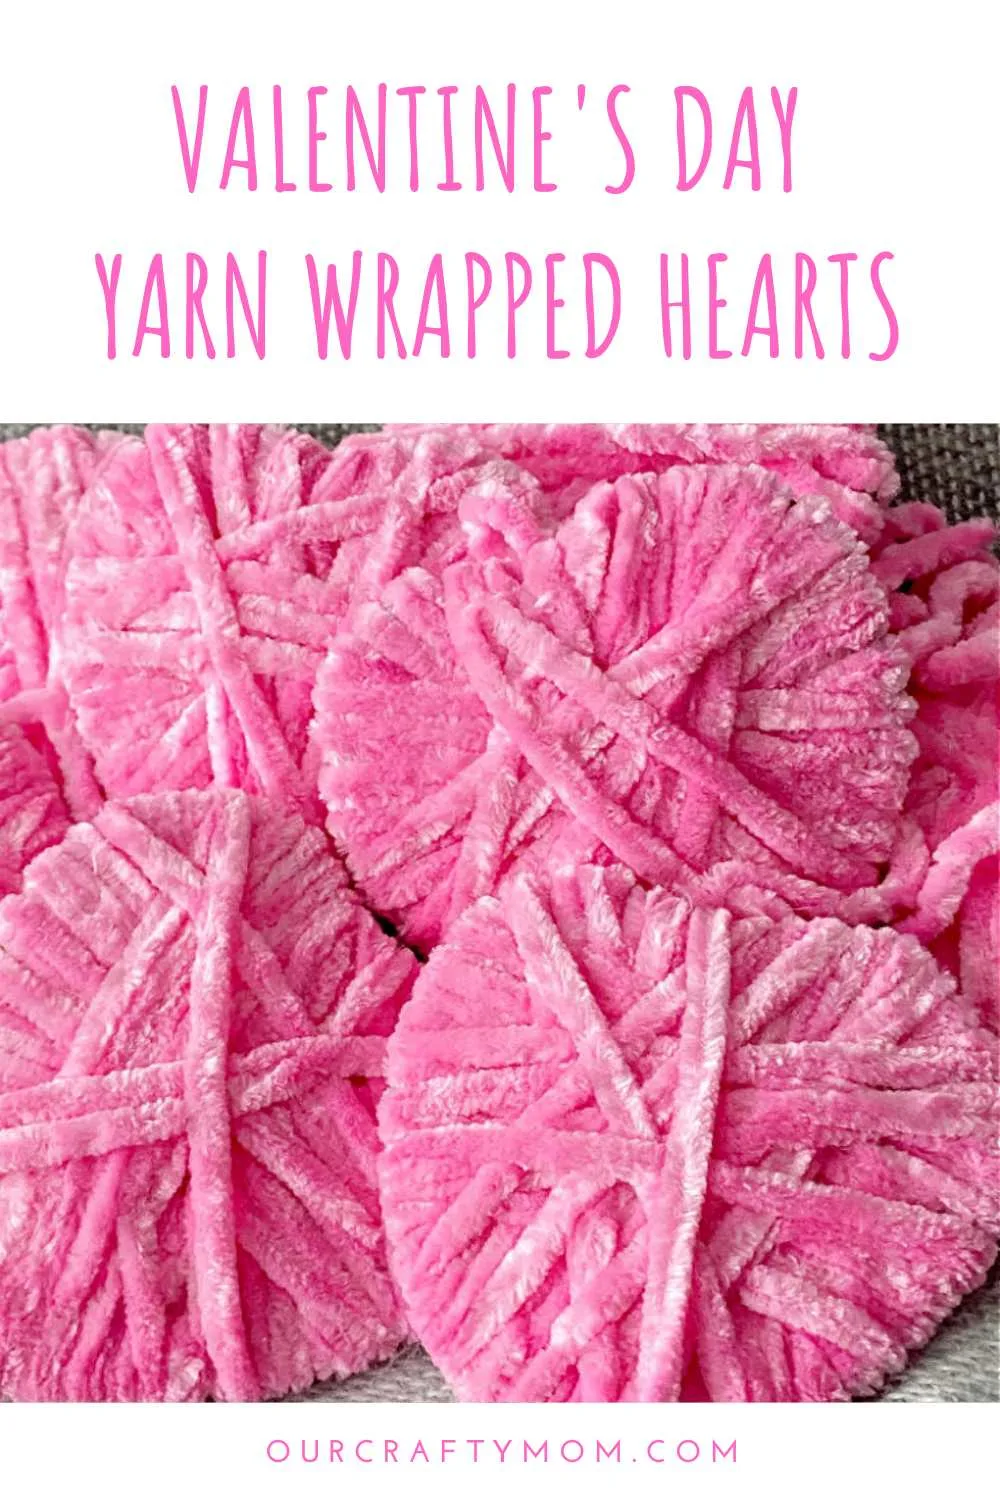 YARN WRAPPED hearts pin with text